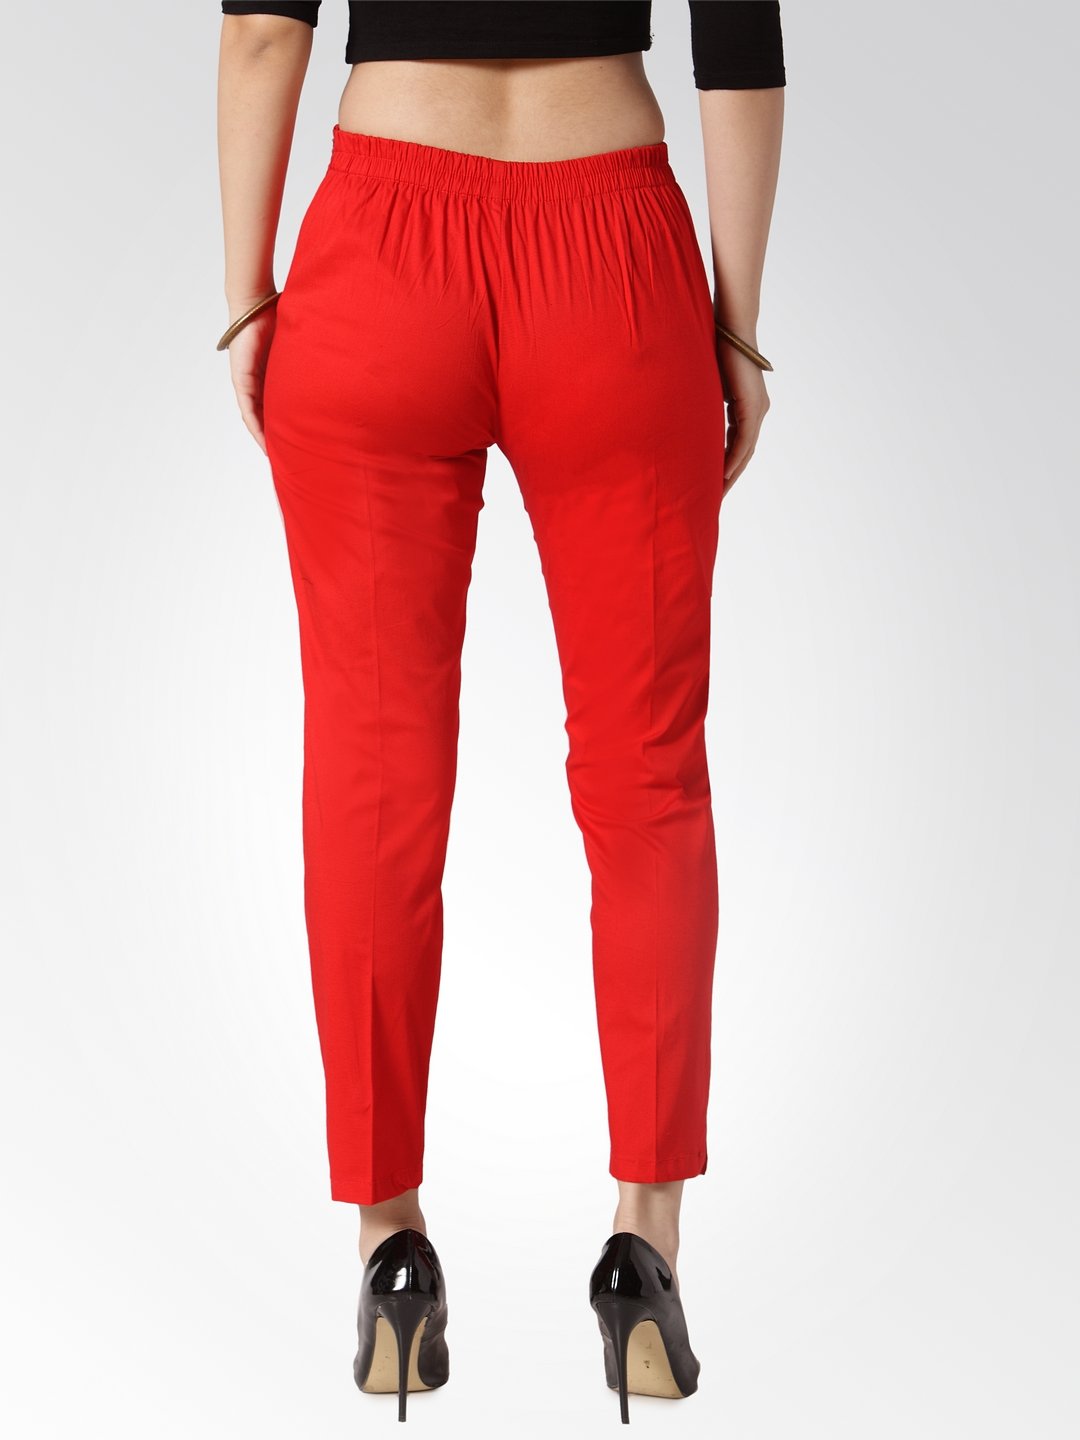 Women's Red Smart Slim Fit Solid Regular Trousers - Jompers